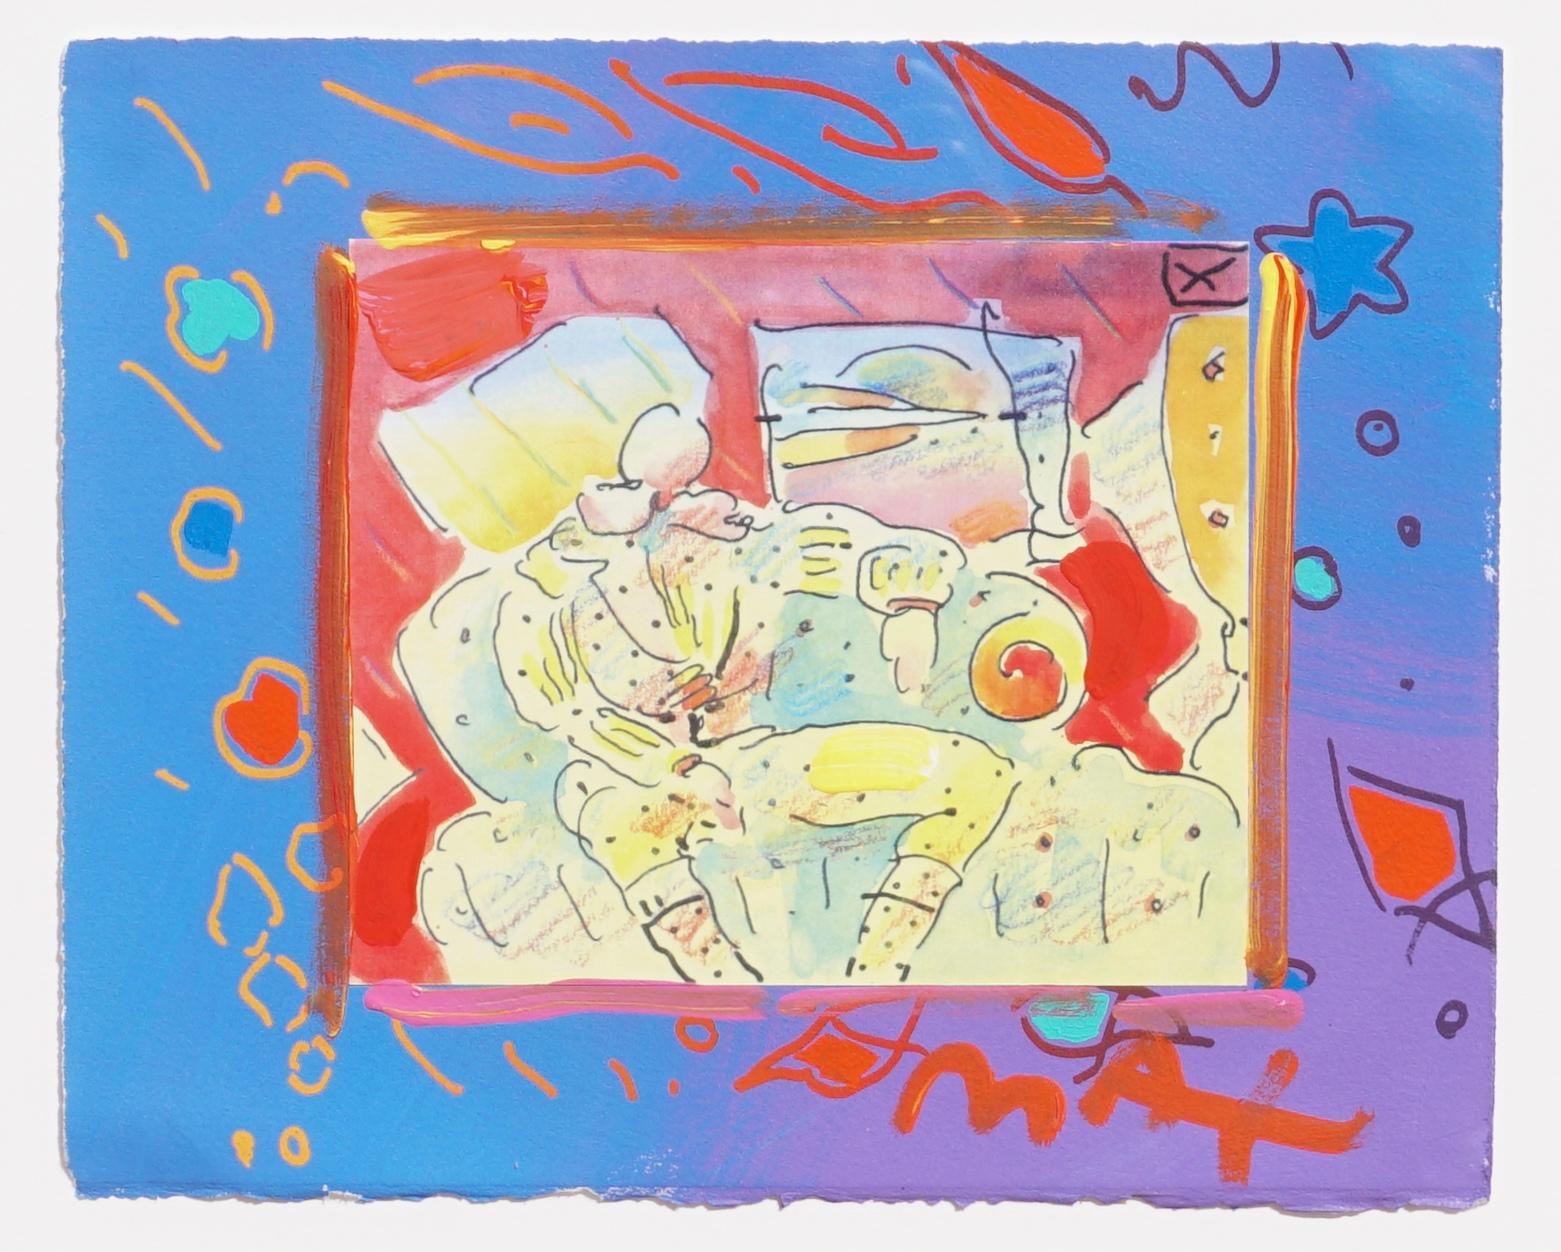 Aesthetic Movement Peter Max Mixed-Media Enamel on Lithograph, 1996